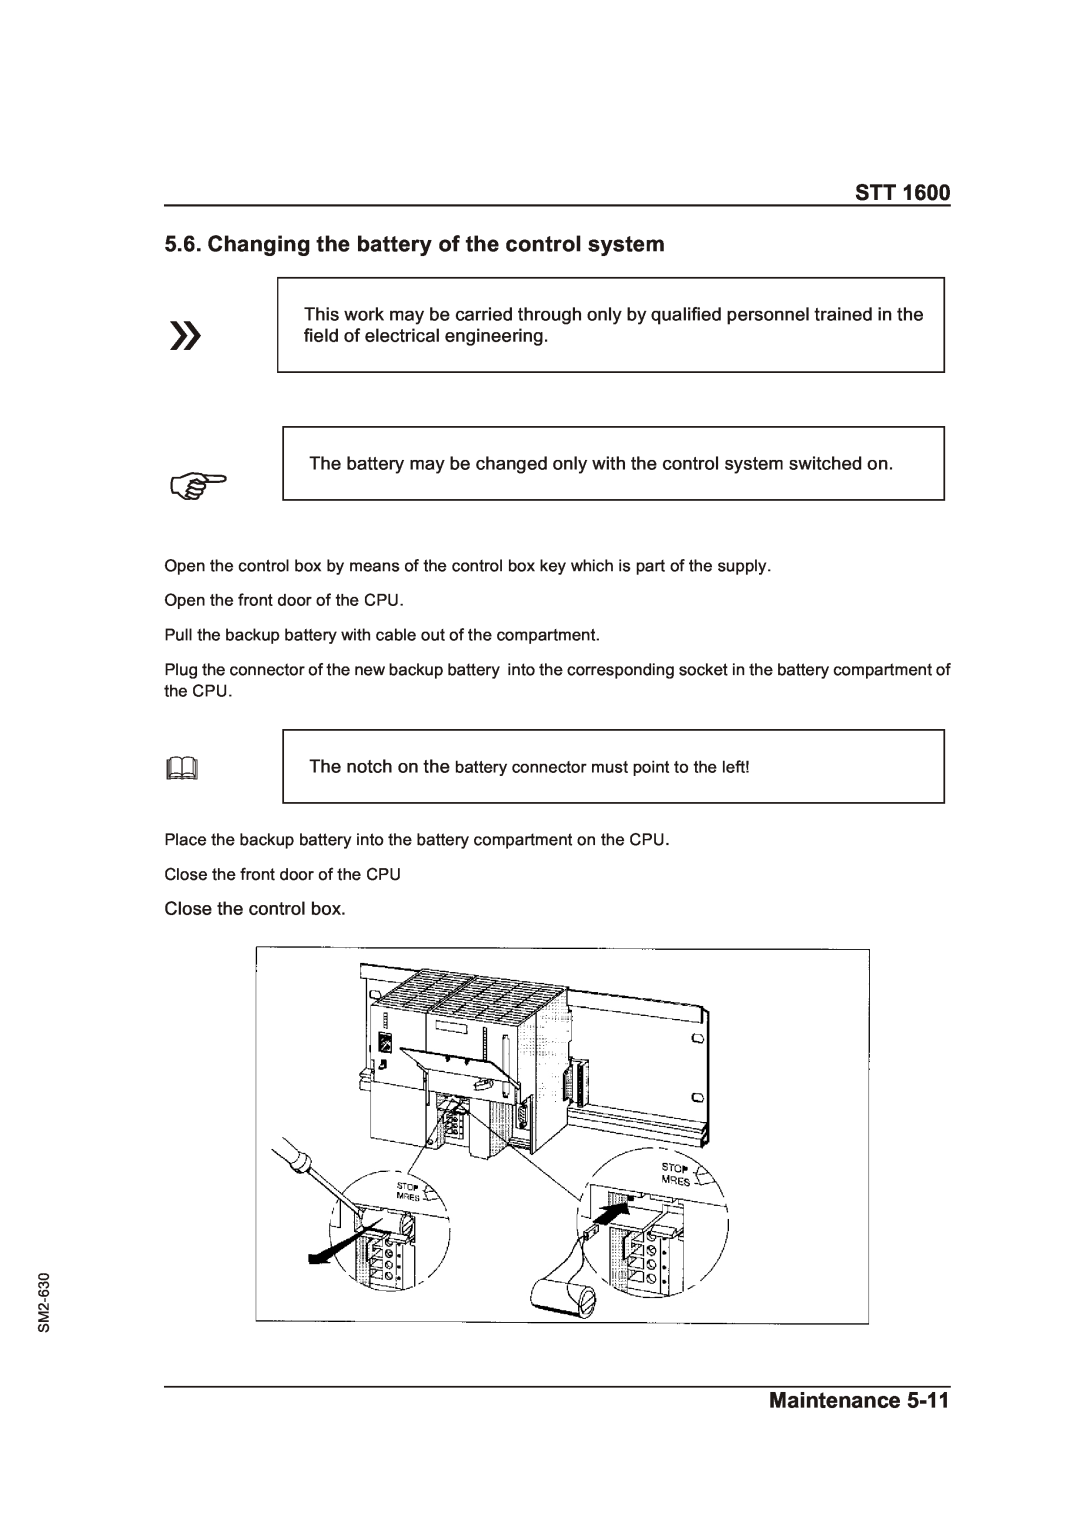 Sterling STT 1600 operating instructions Changing the battery of the control system, Maintenance 